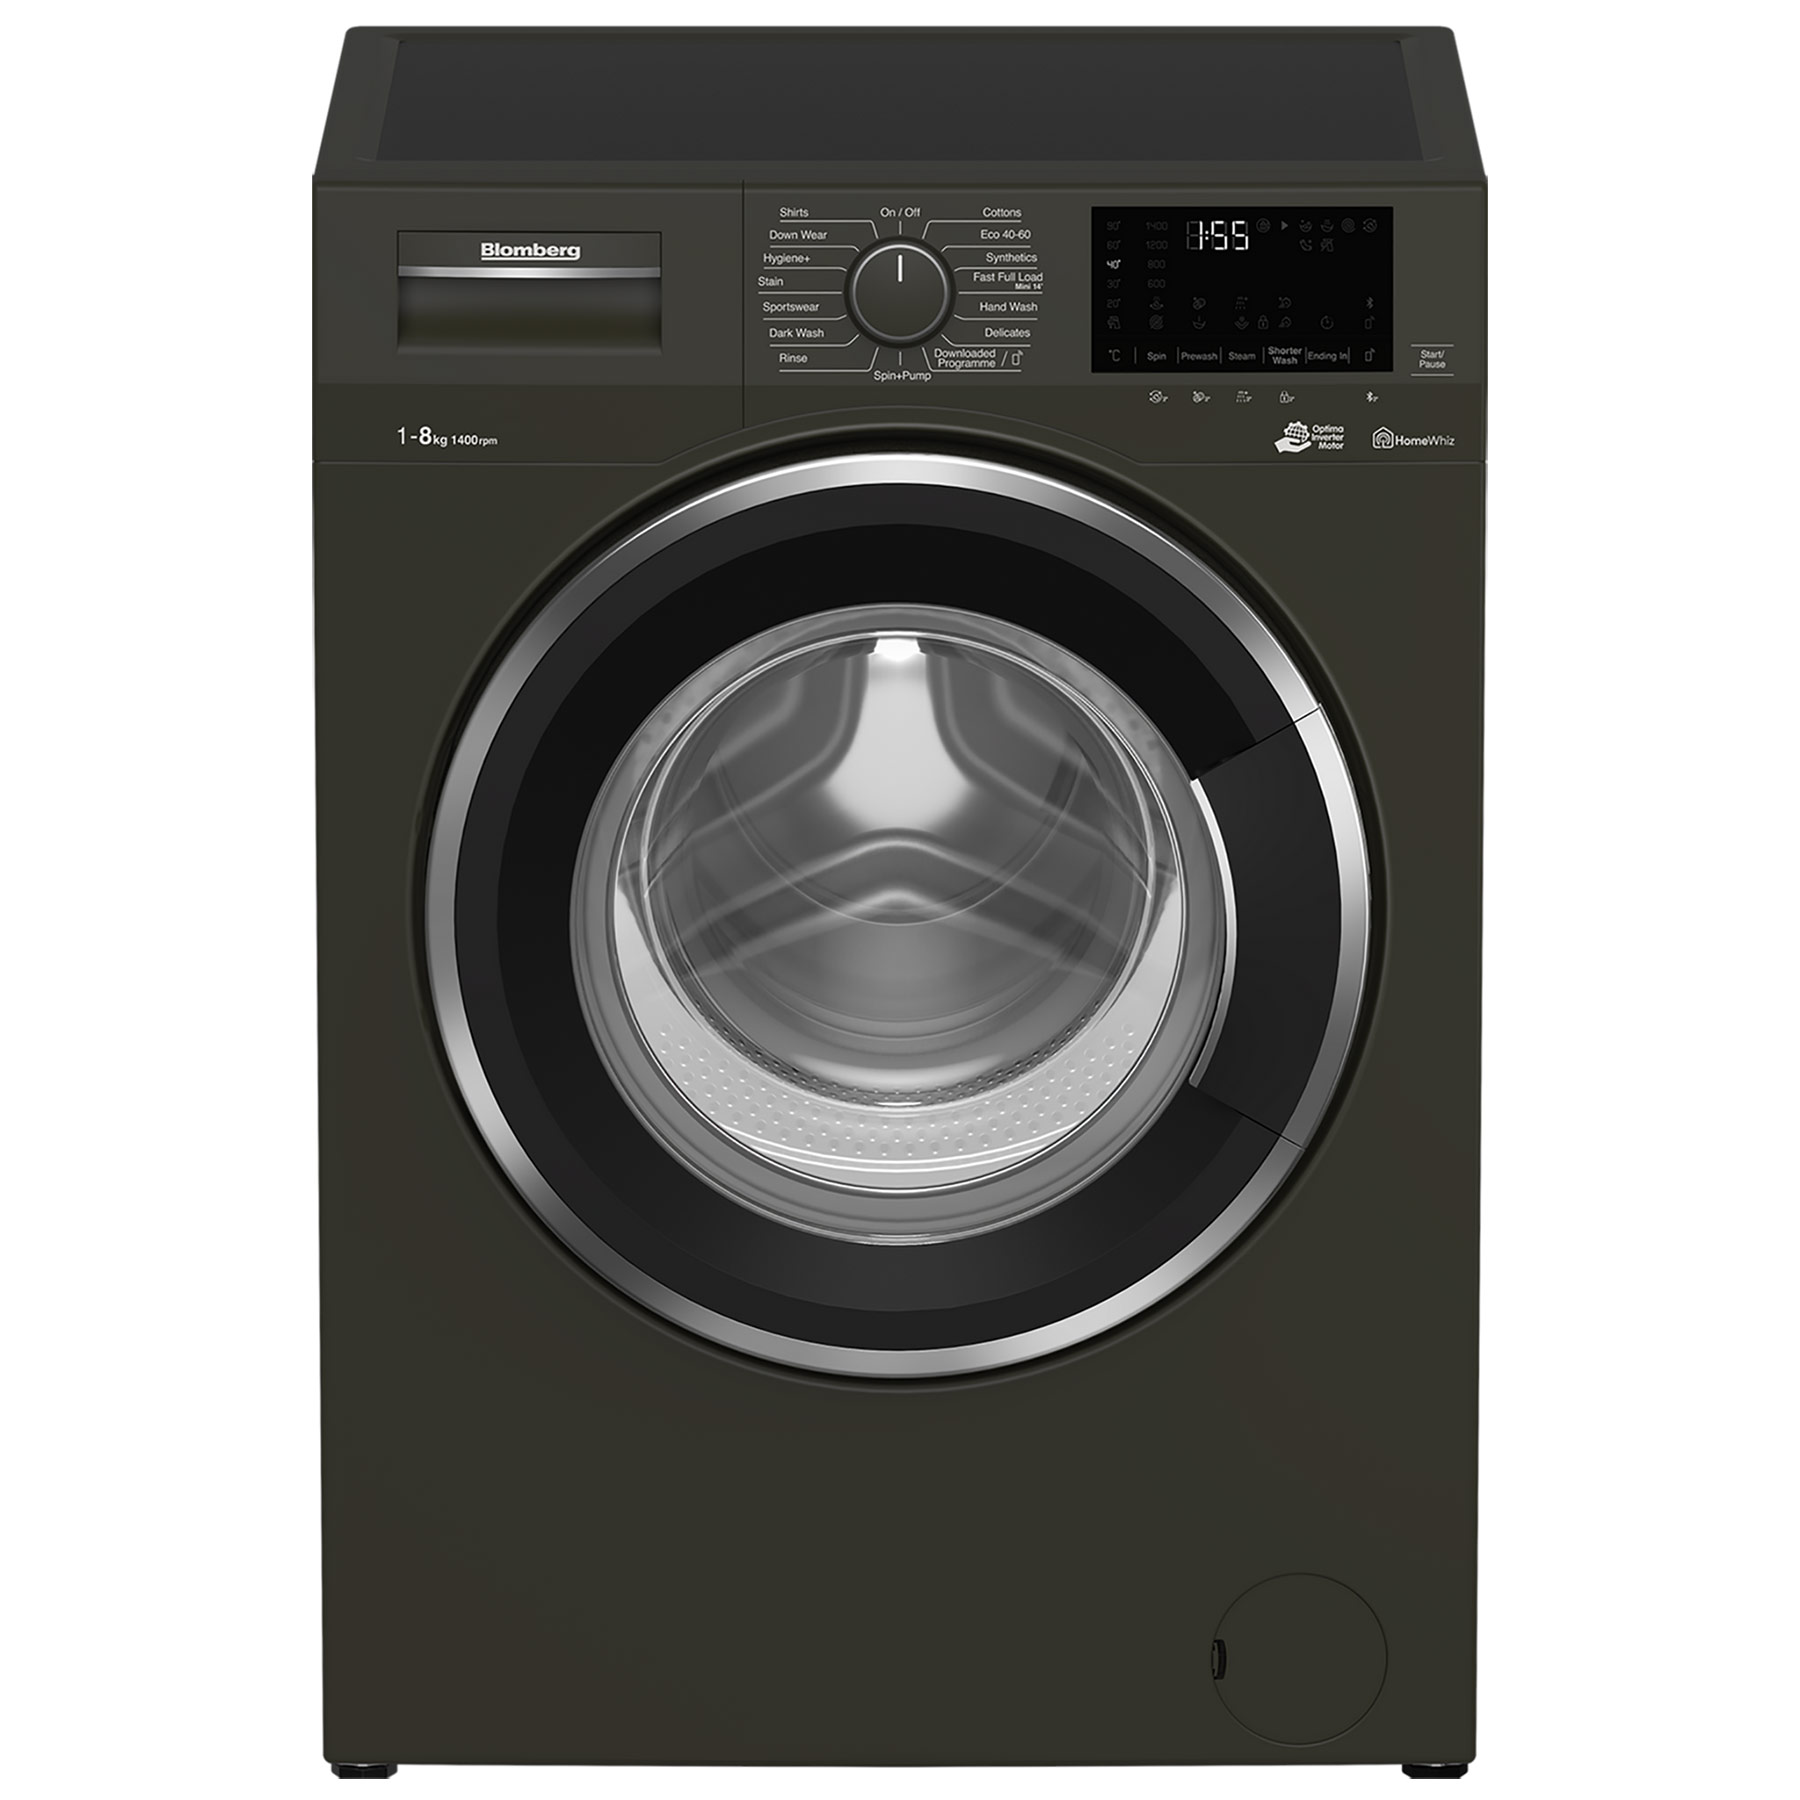 Image of Blomberg LWF184620G Washing Machine Graphite 1400rpm 8kg A Rated 3yr G